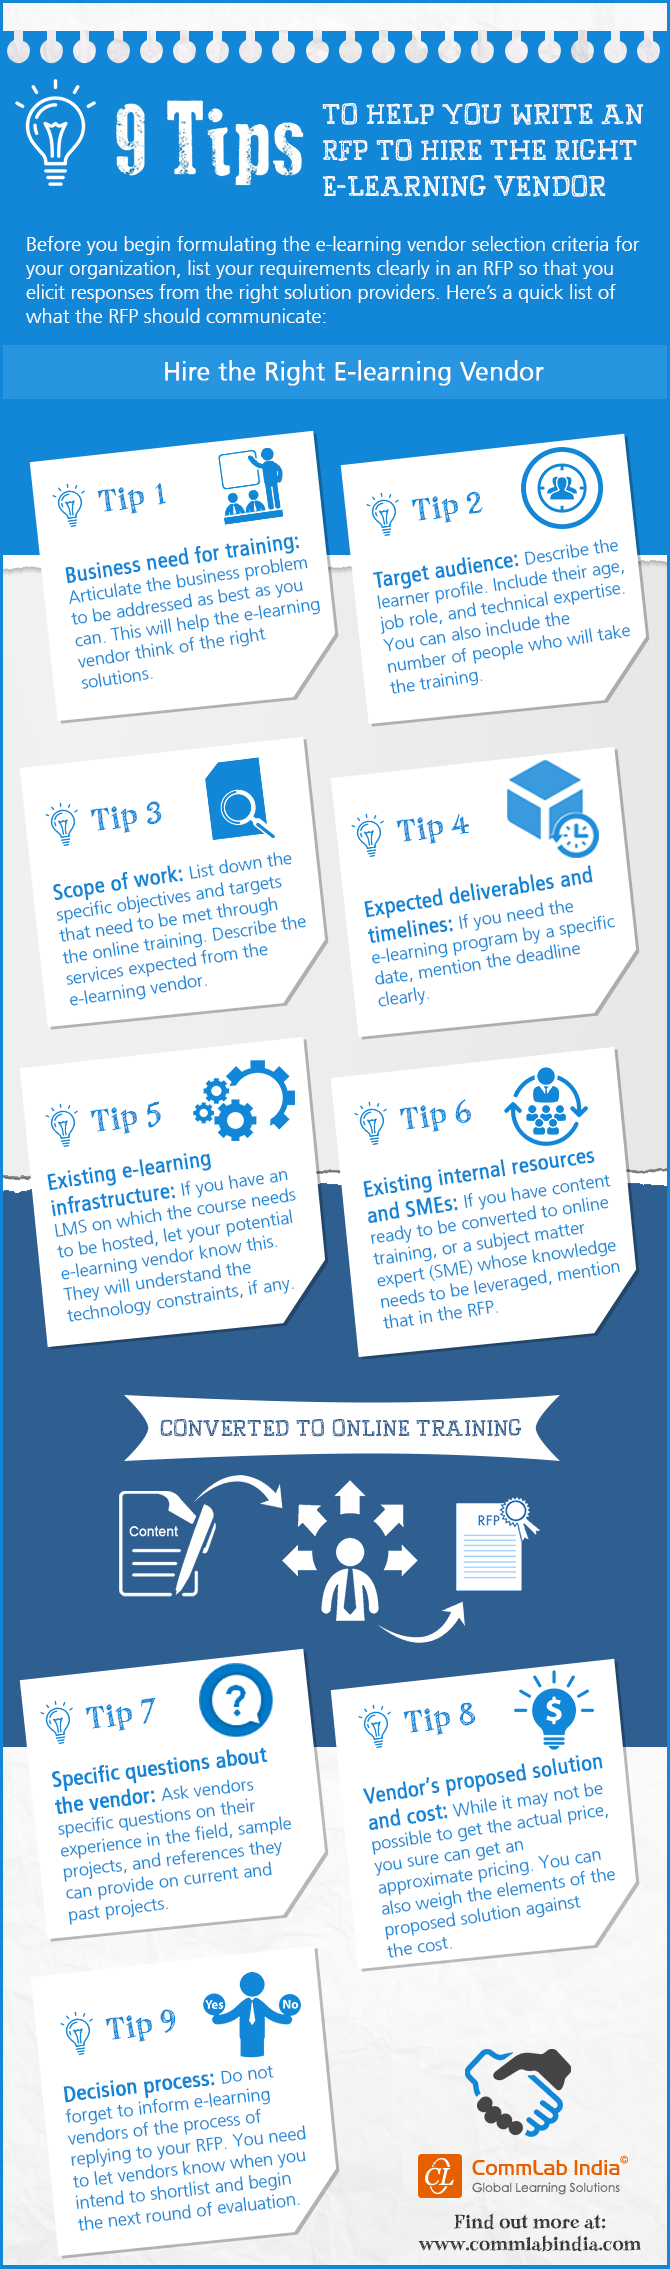 9 Tips that Help You Write an Effective RFP to Hire an E-learning Vendor [Infographic]